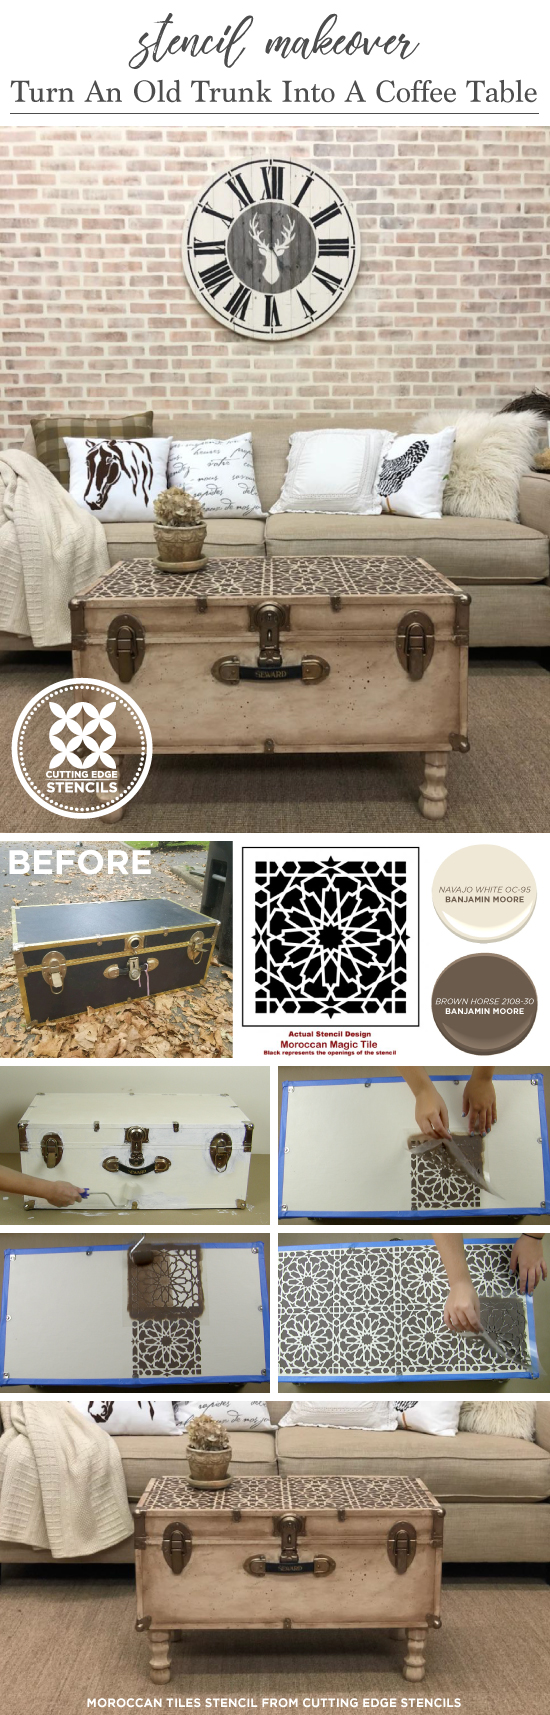 Cutting Edge Stencils shares how to makeover over a vintage trunk into a coffee table using the Moroccan Magic Tile Stencil. http://www.cuttingedgestencils.com/moroccan-tile-stencil-cement-tiles-floor-tile-designs.html